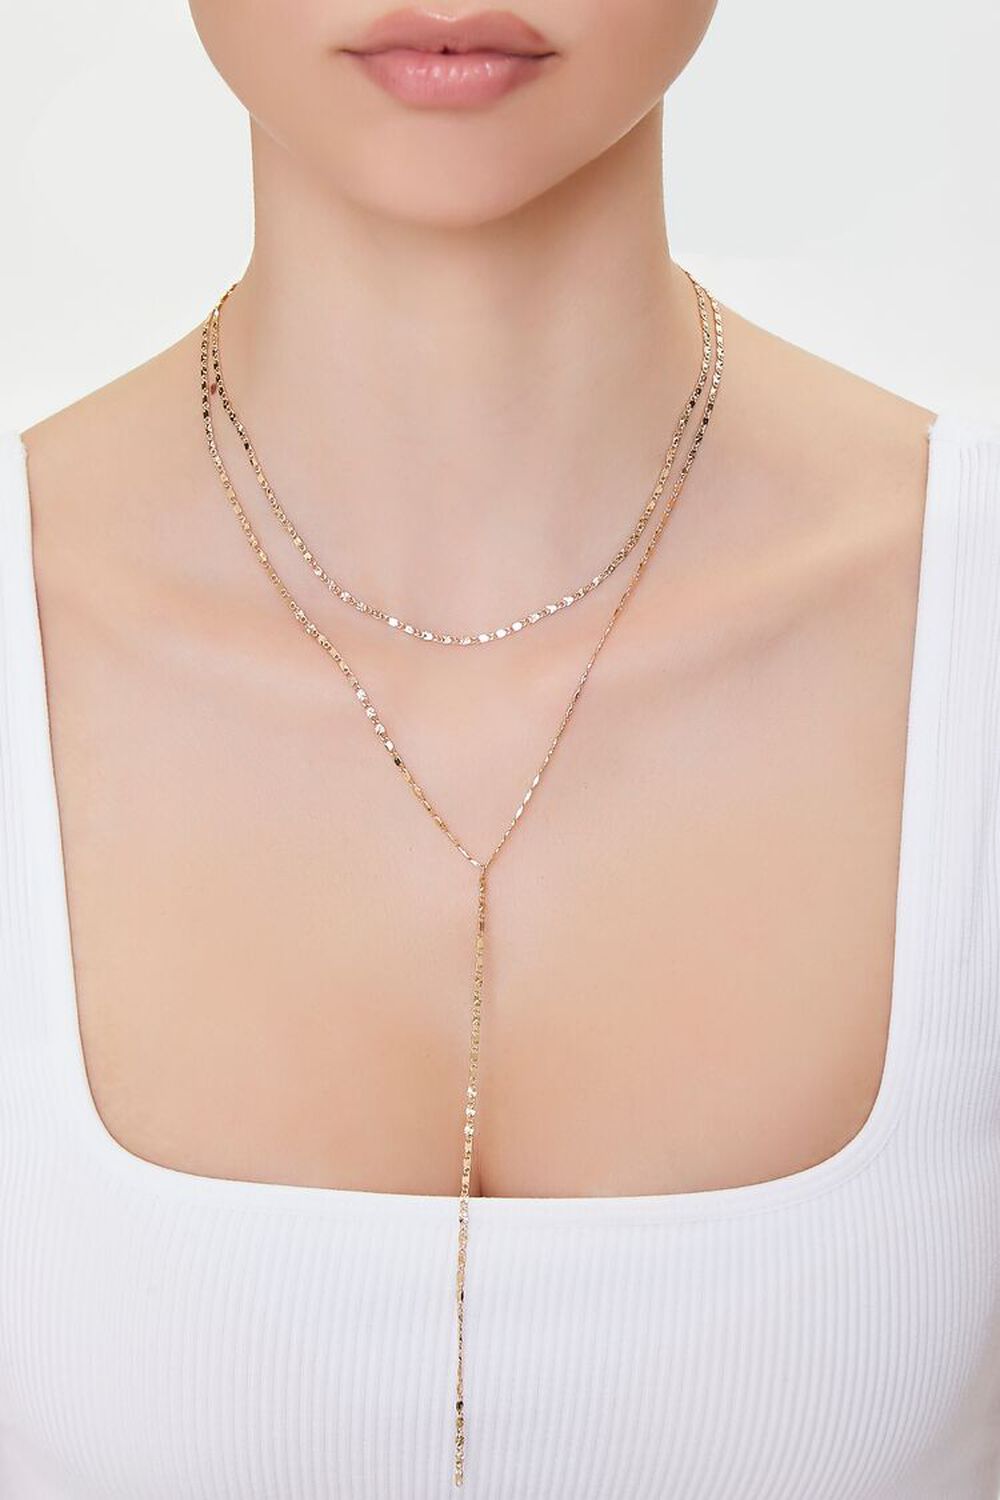 GOLD Y-Chain Layered Chain Necklace, image 1